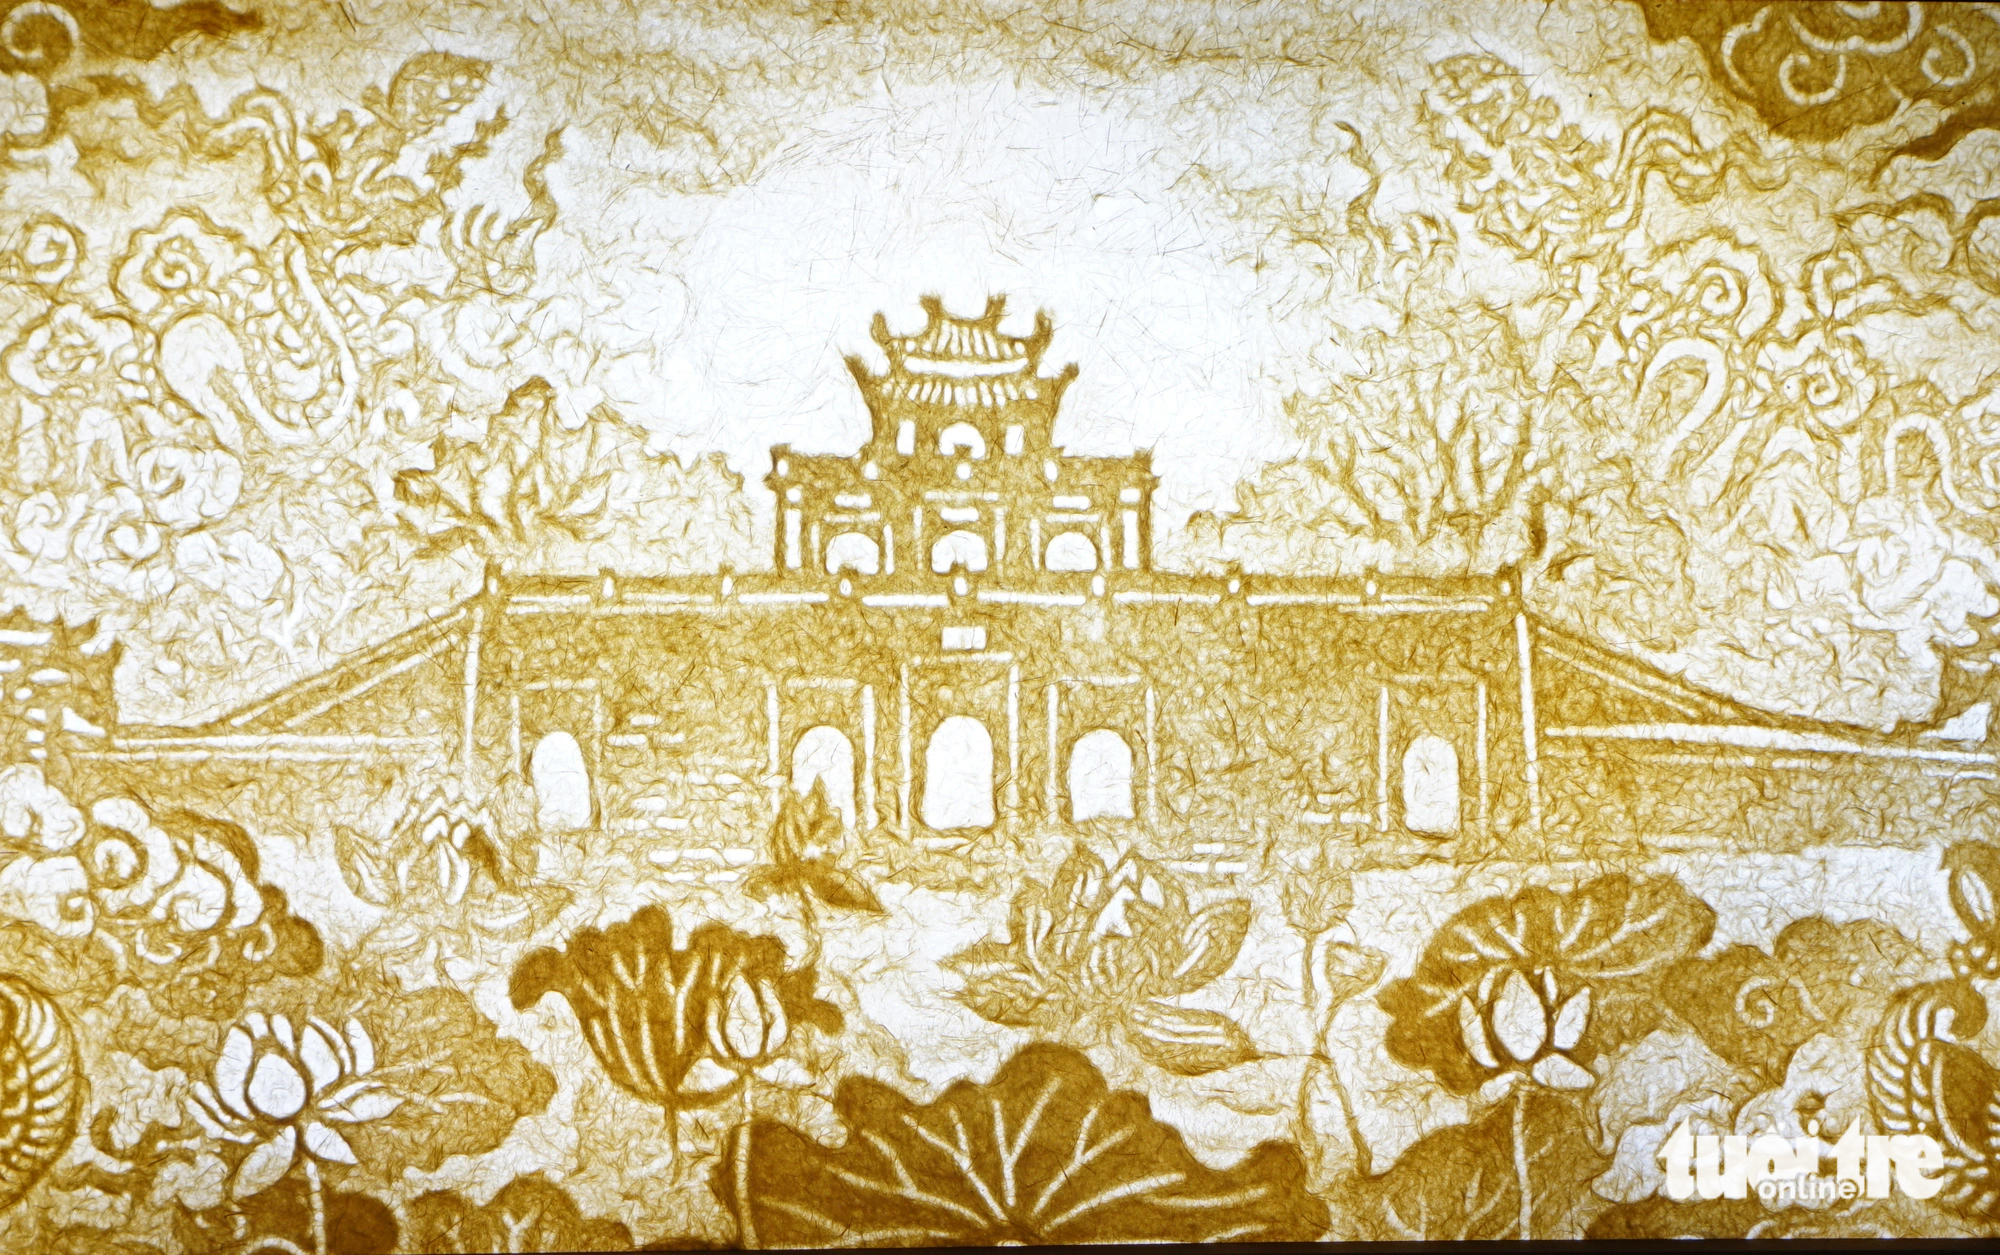 The Imperial Citadel of Thang Long is depicted on a ‘truc chi’ painting on display at 22 Hang Buom Cultural and Arts Center in Hanoi. Photo: Nguyen Hien / Tuoi Tre